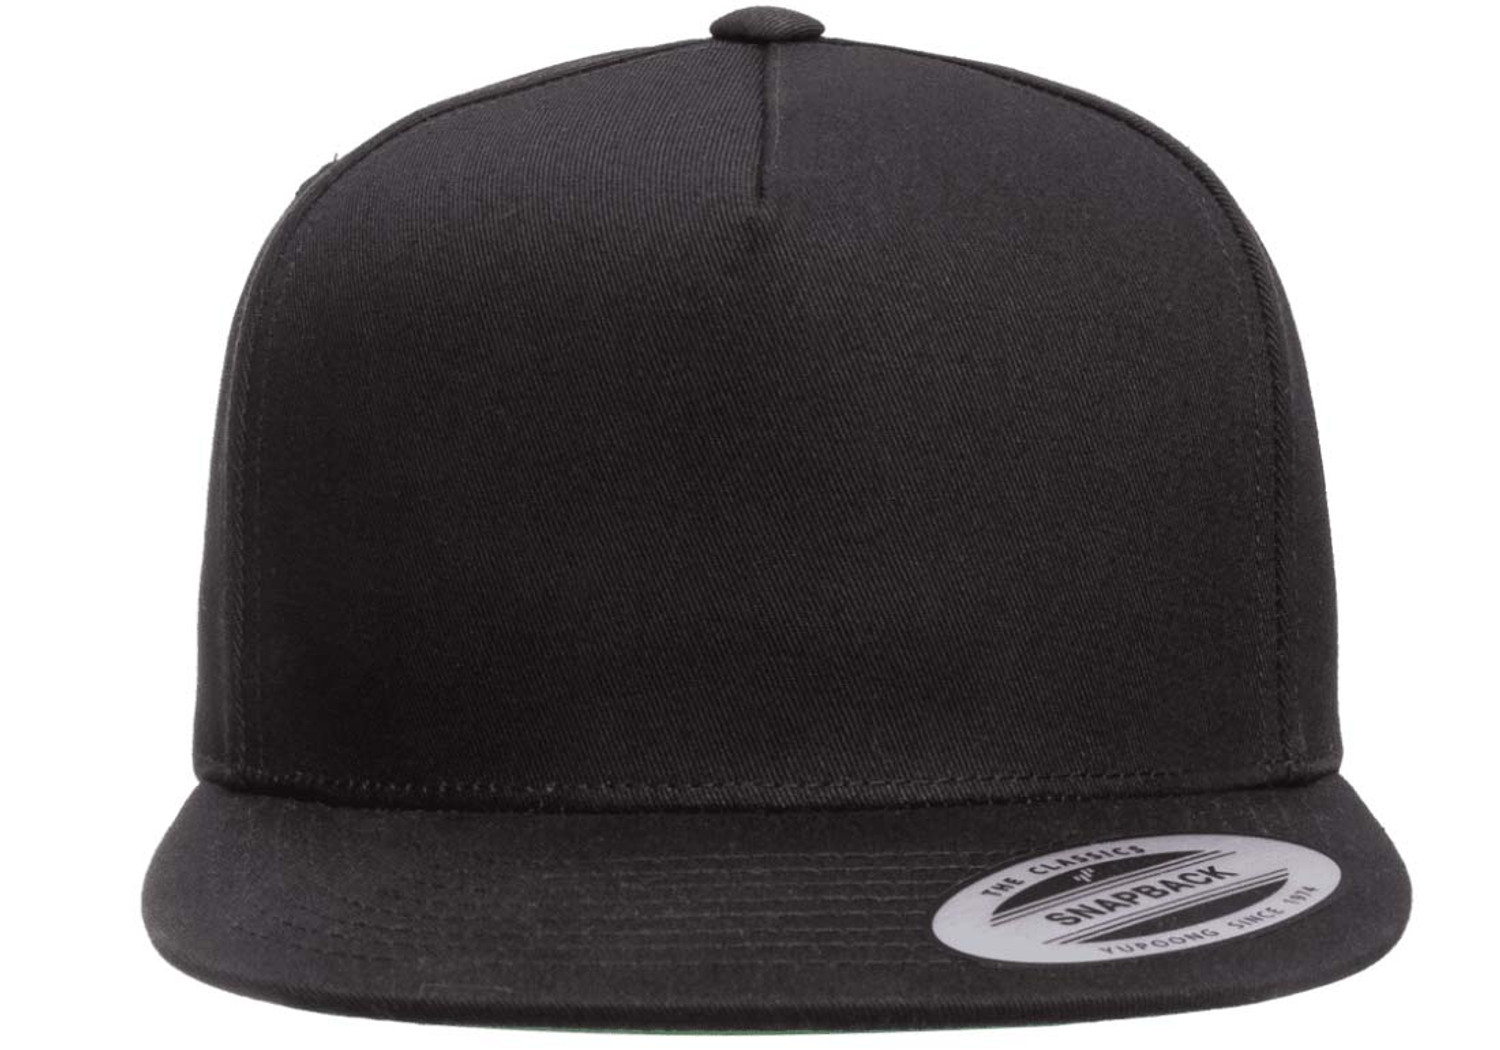 Yupoong Y6007 5-Panel Cotton Twill Snapback Cap